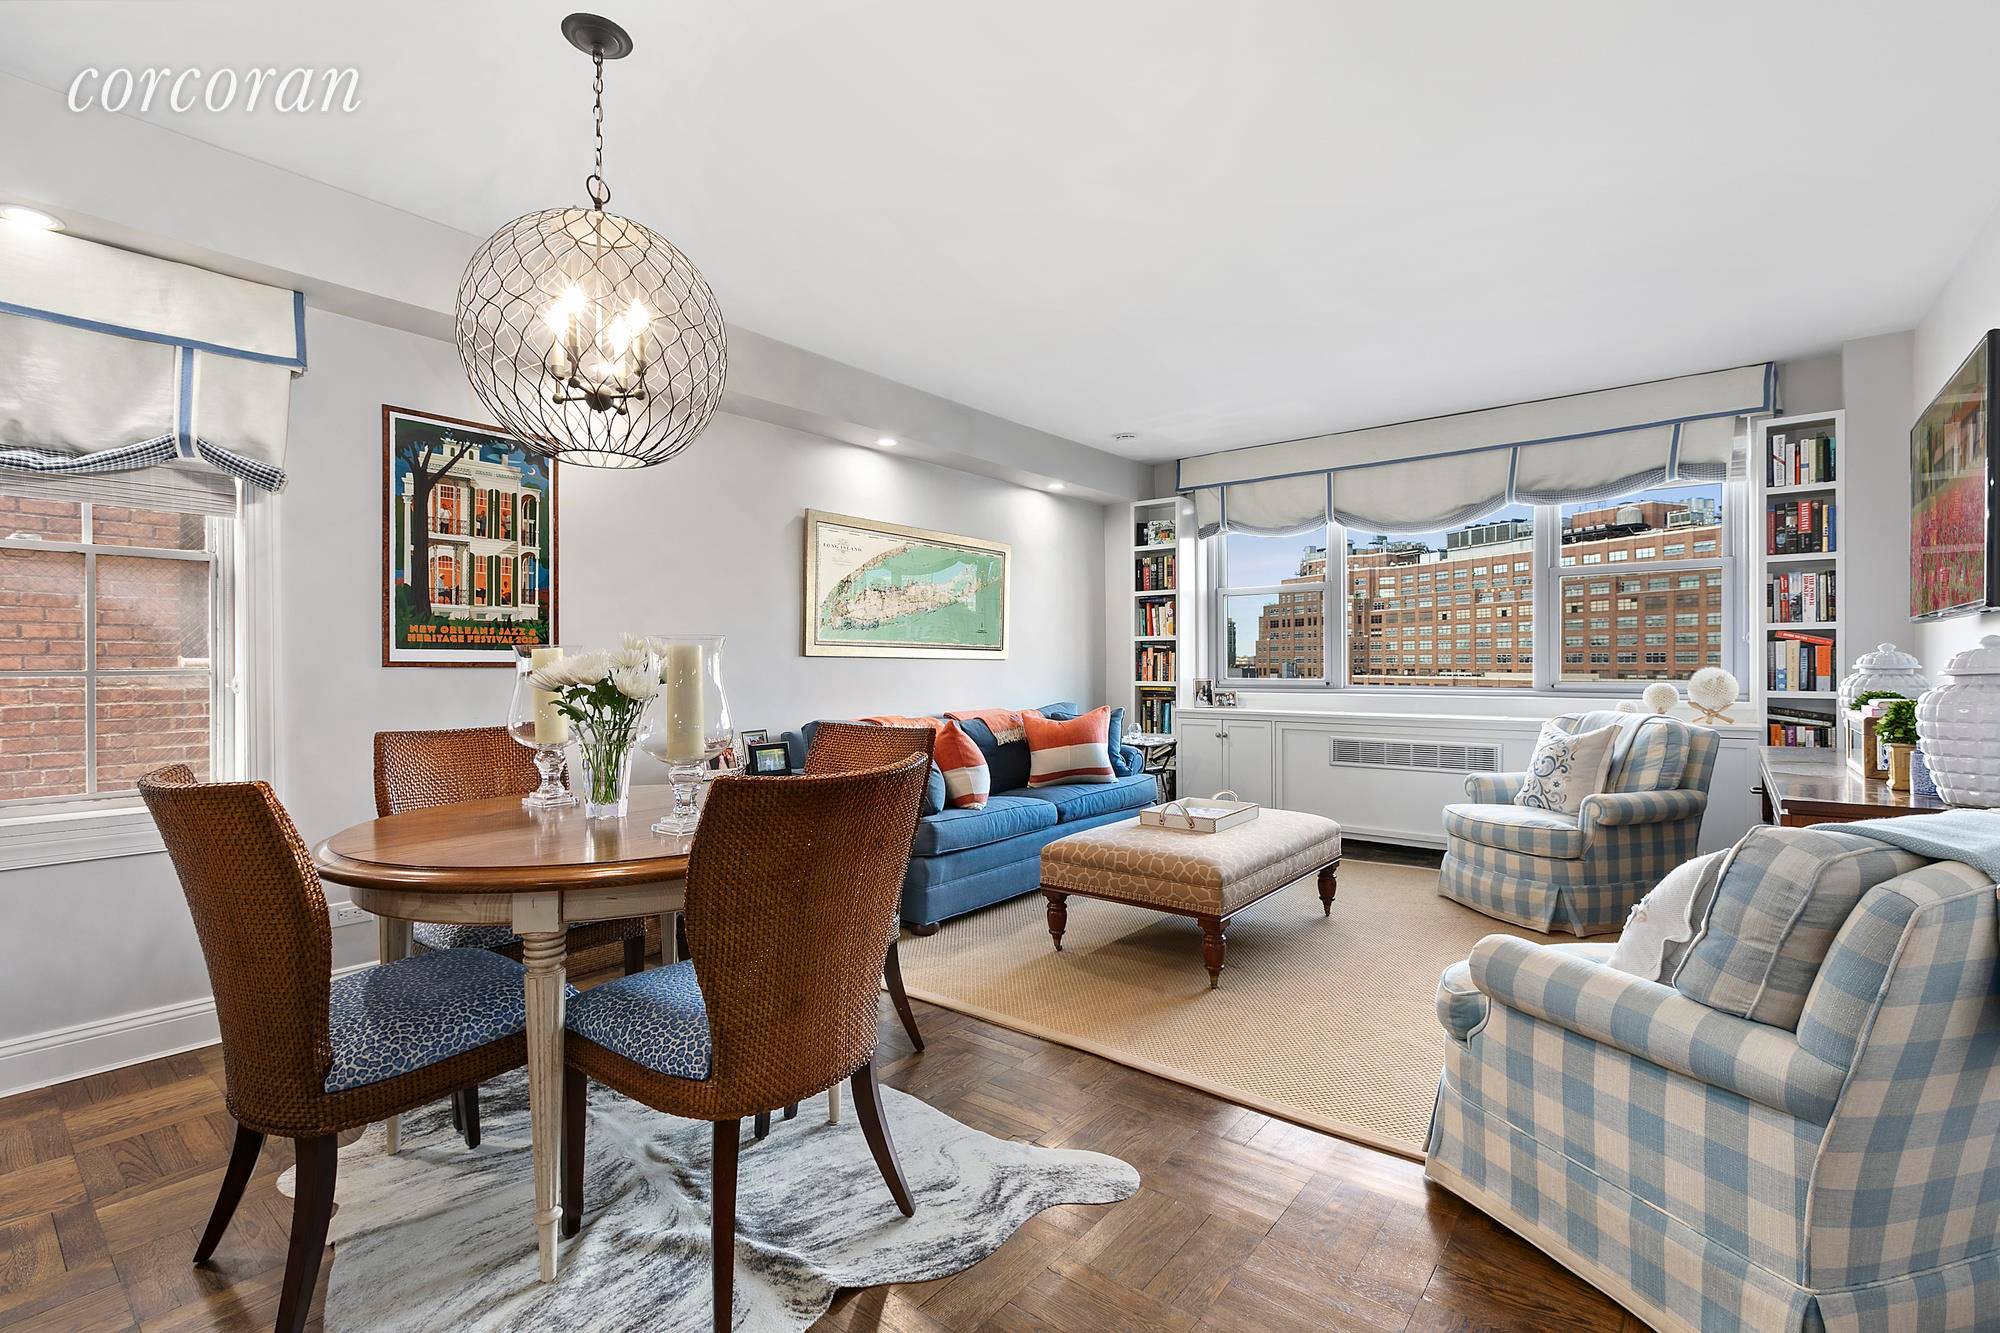 This fabulous, gut renovated, sun blasted, mint corner 15th Floor 1 bedroom home combines timeless prewar elegance with meticulous state of the art renovations.